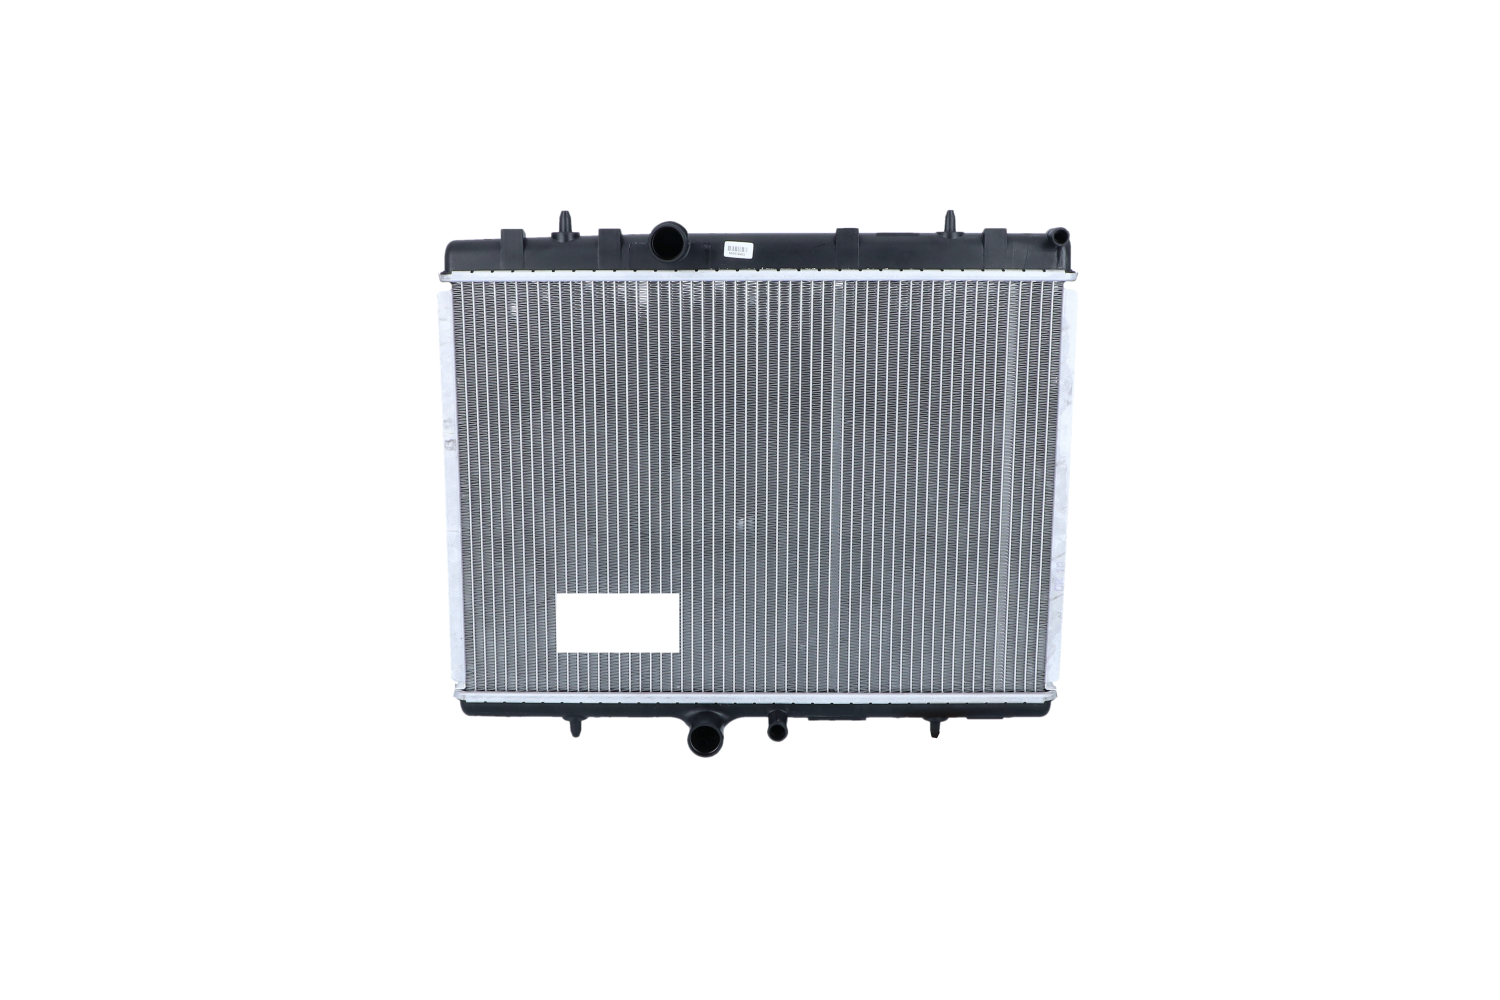 NRF EASY FIT 50438 Engine radiator Aluminium, 557 x 380 x 27 mm, with mounting parts, Brazed cooling fins